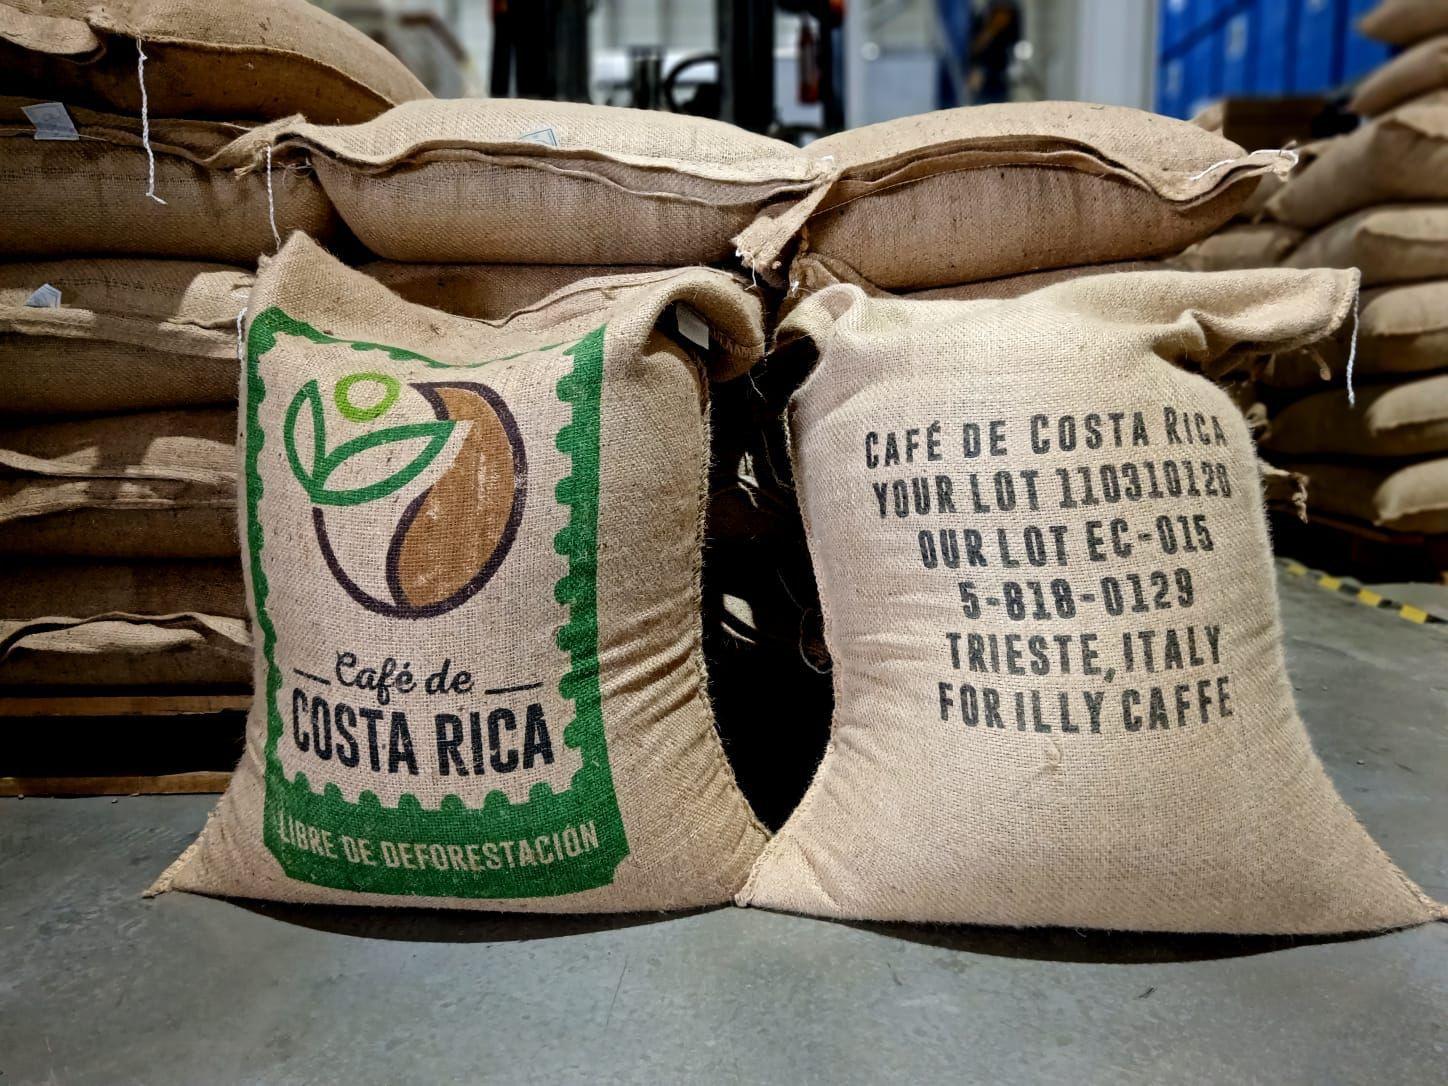 Costa Rica proudly announced its first shipment of deforestation-free coffee